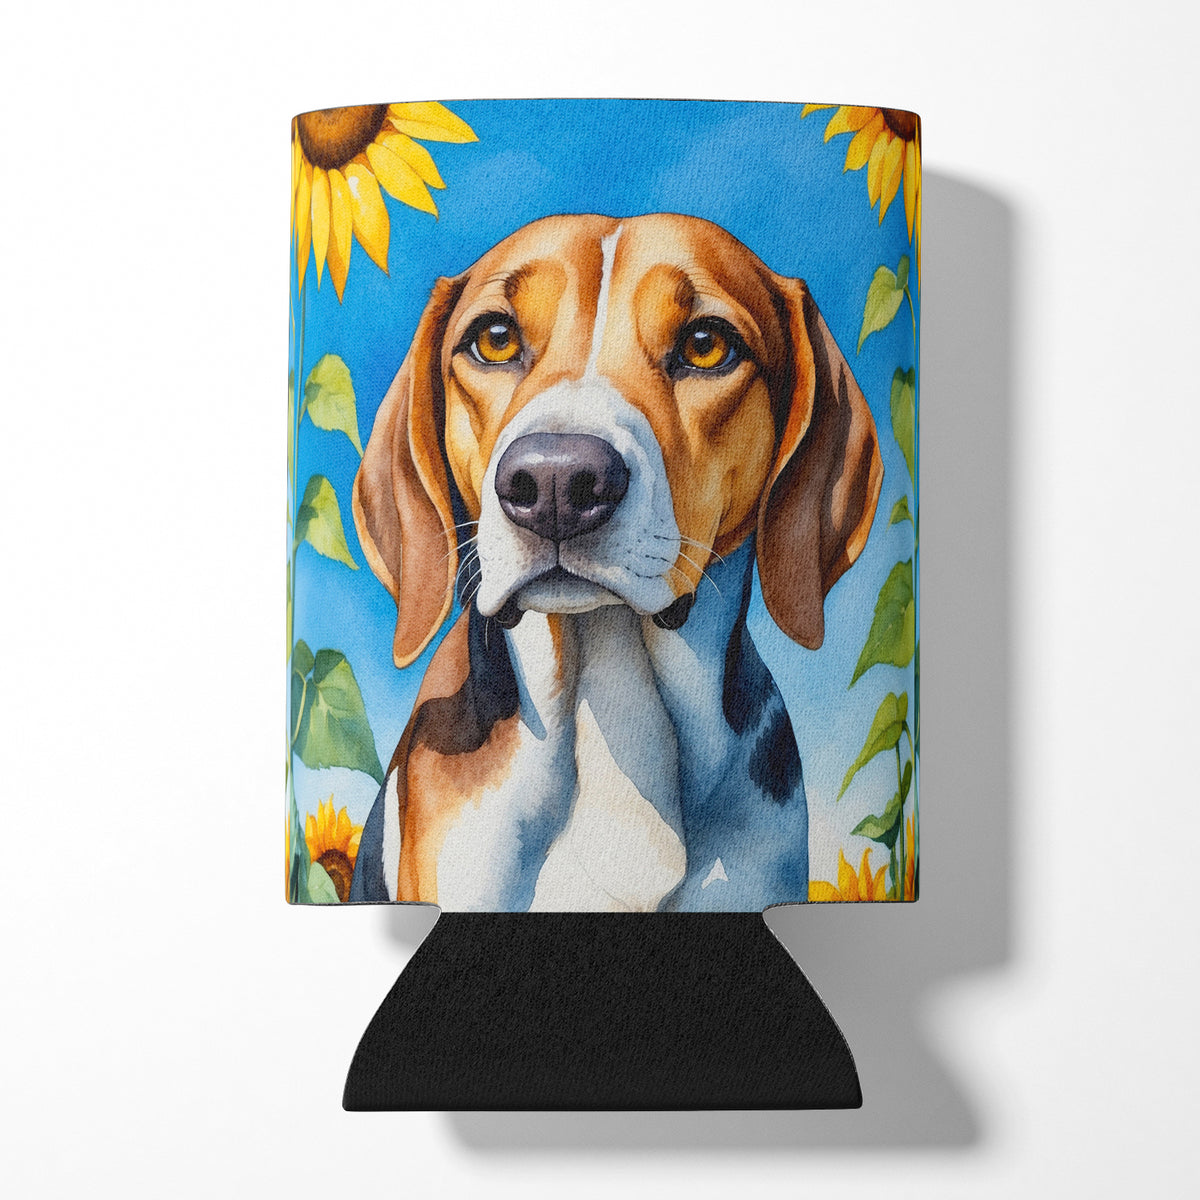 Buy this American Foxhound in Sunflowers Can or Bottle Hugger